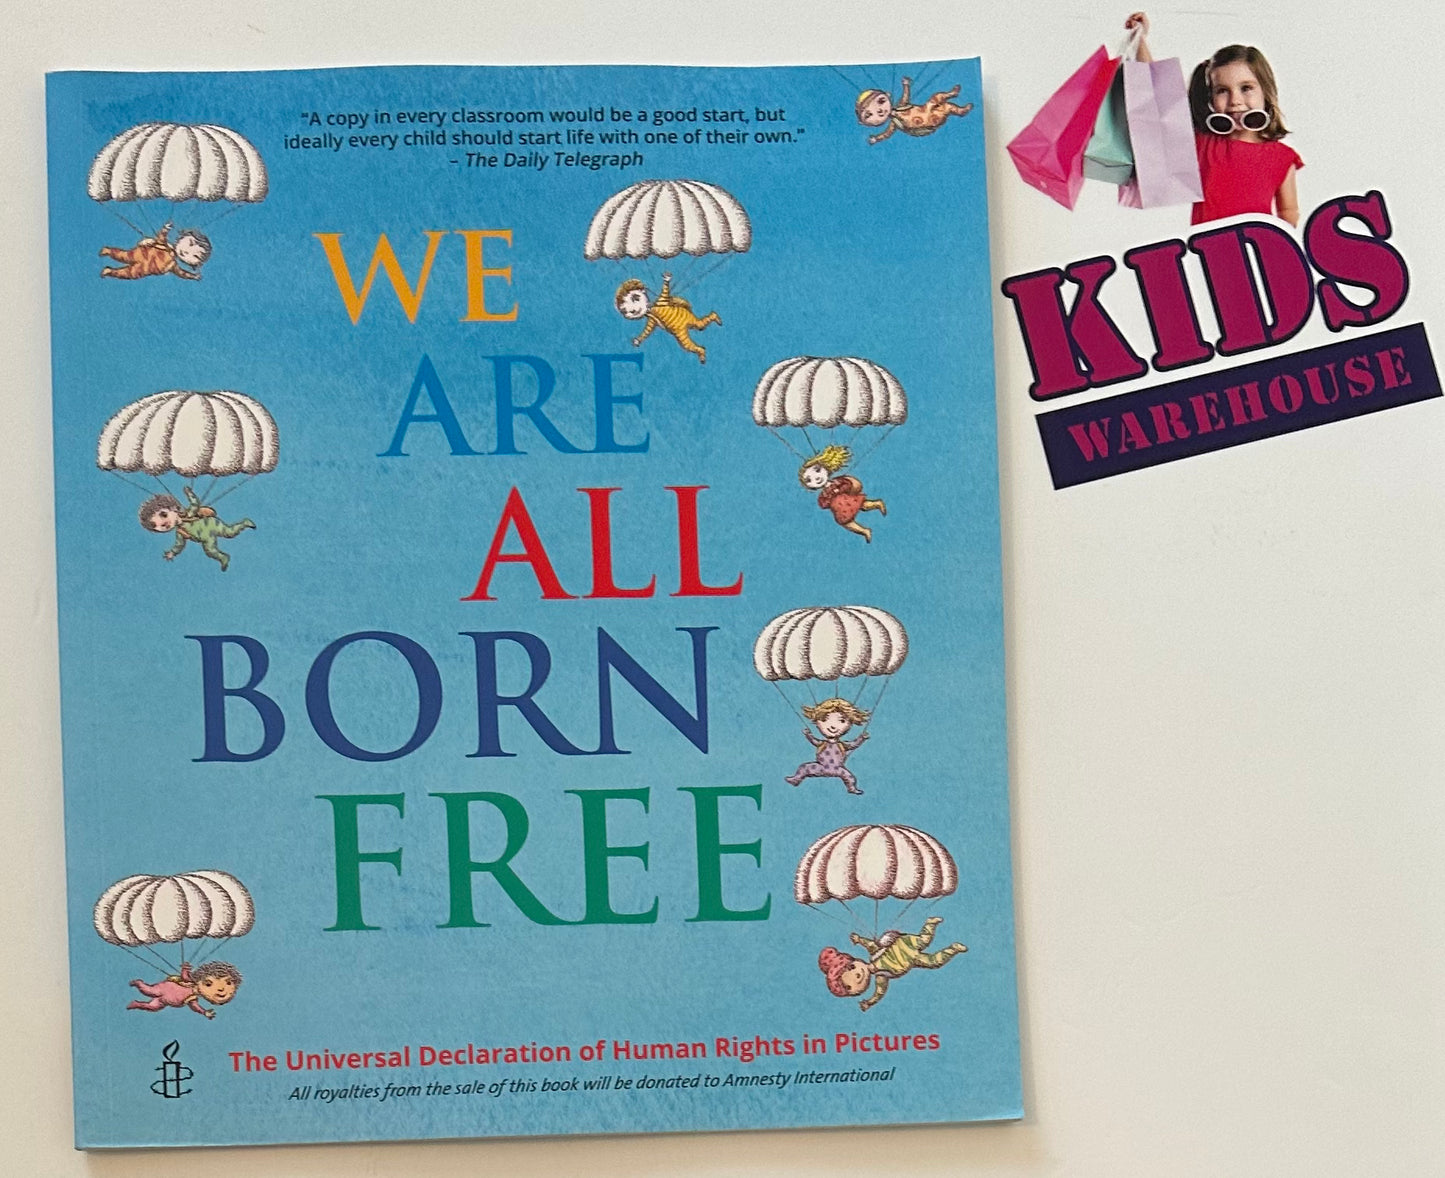 We are All Born Free – Kids Warehouse AU